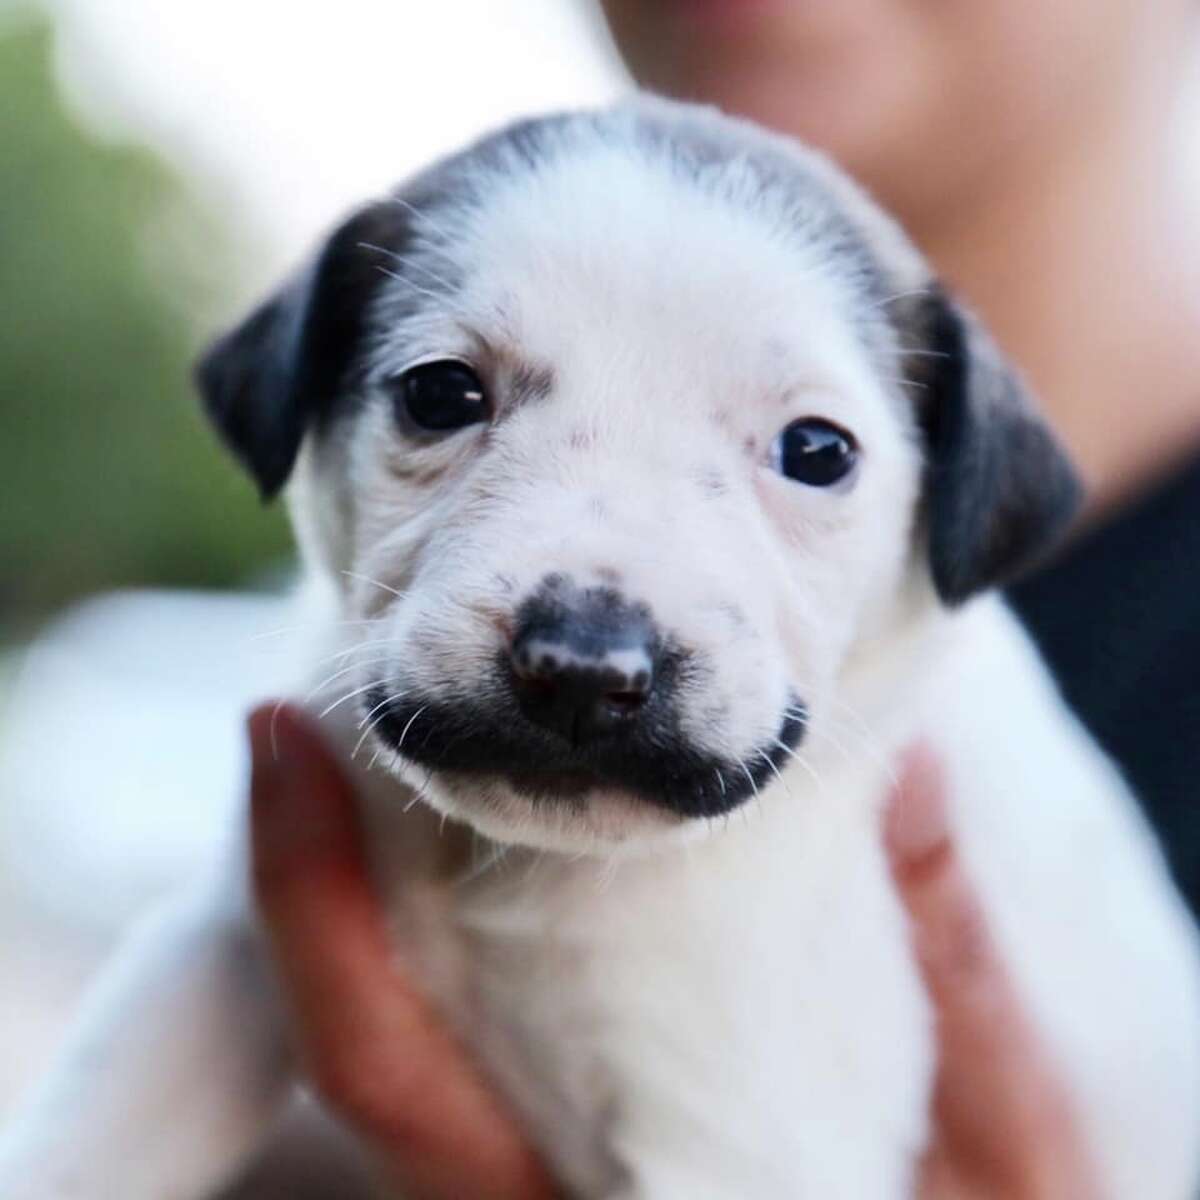 Salvador Dolly is a five week old shepherd mutt that has captured the hearts of people everywhere for her unusual face marking - a handlebar mustache. Photo courtesy Hearts & Bones Animal Rescue